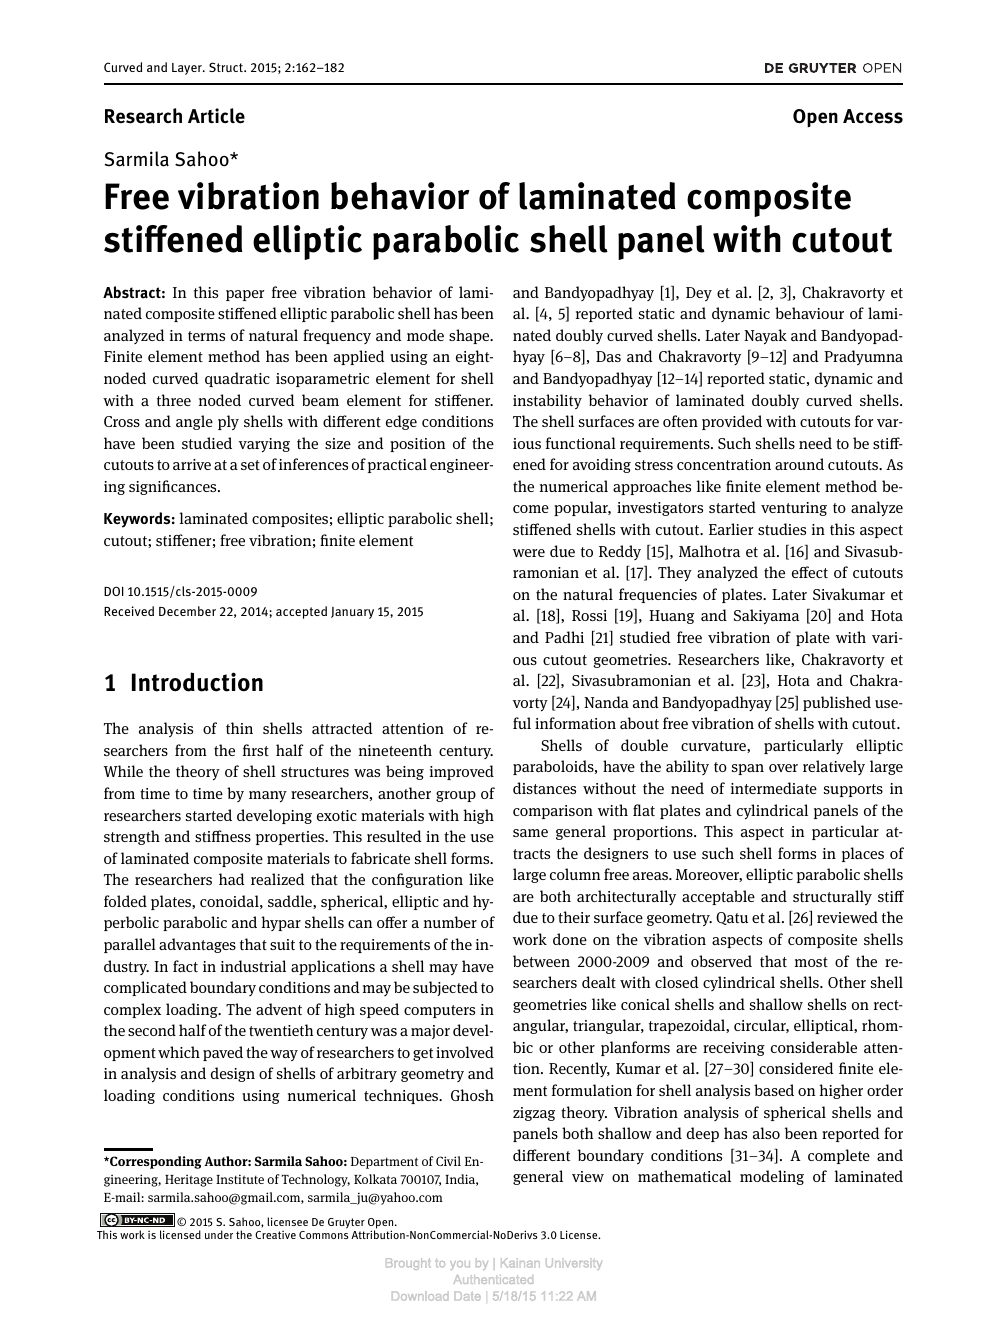 Free Vibration Behavior Of Laminated Composite Stiffened Elliptic Parabolic Shell Panel With Cutout Topic Of Research Paper In Civil Engineering Download Scholarly Article Pdf And Read For Free On Cyberleninka Open